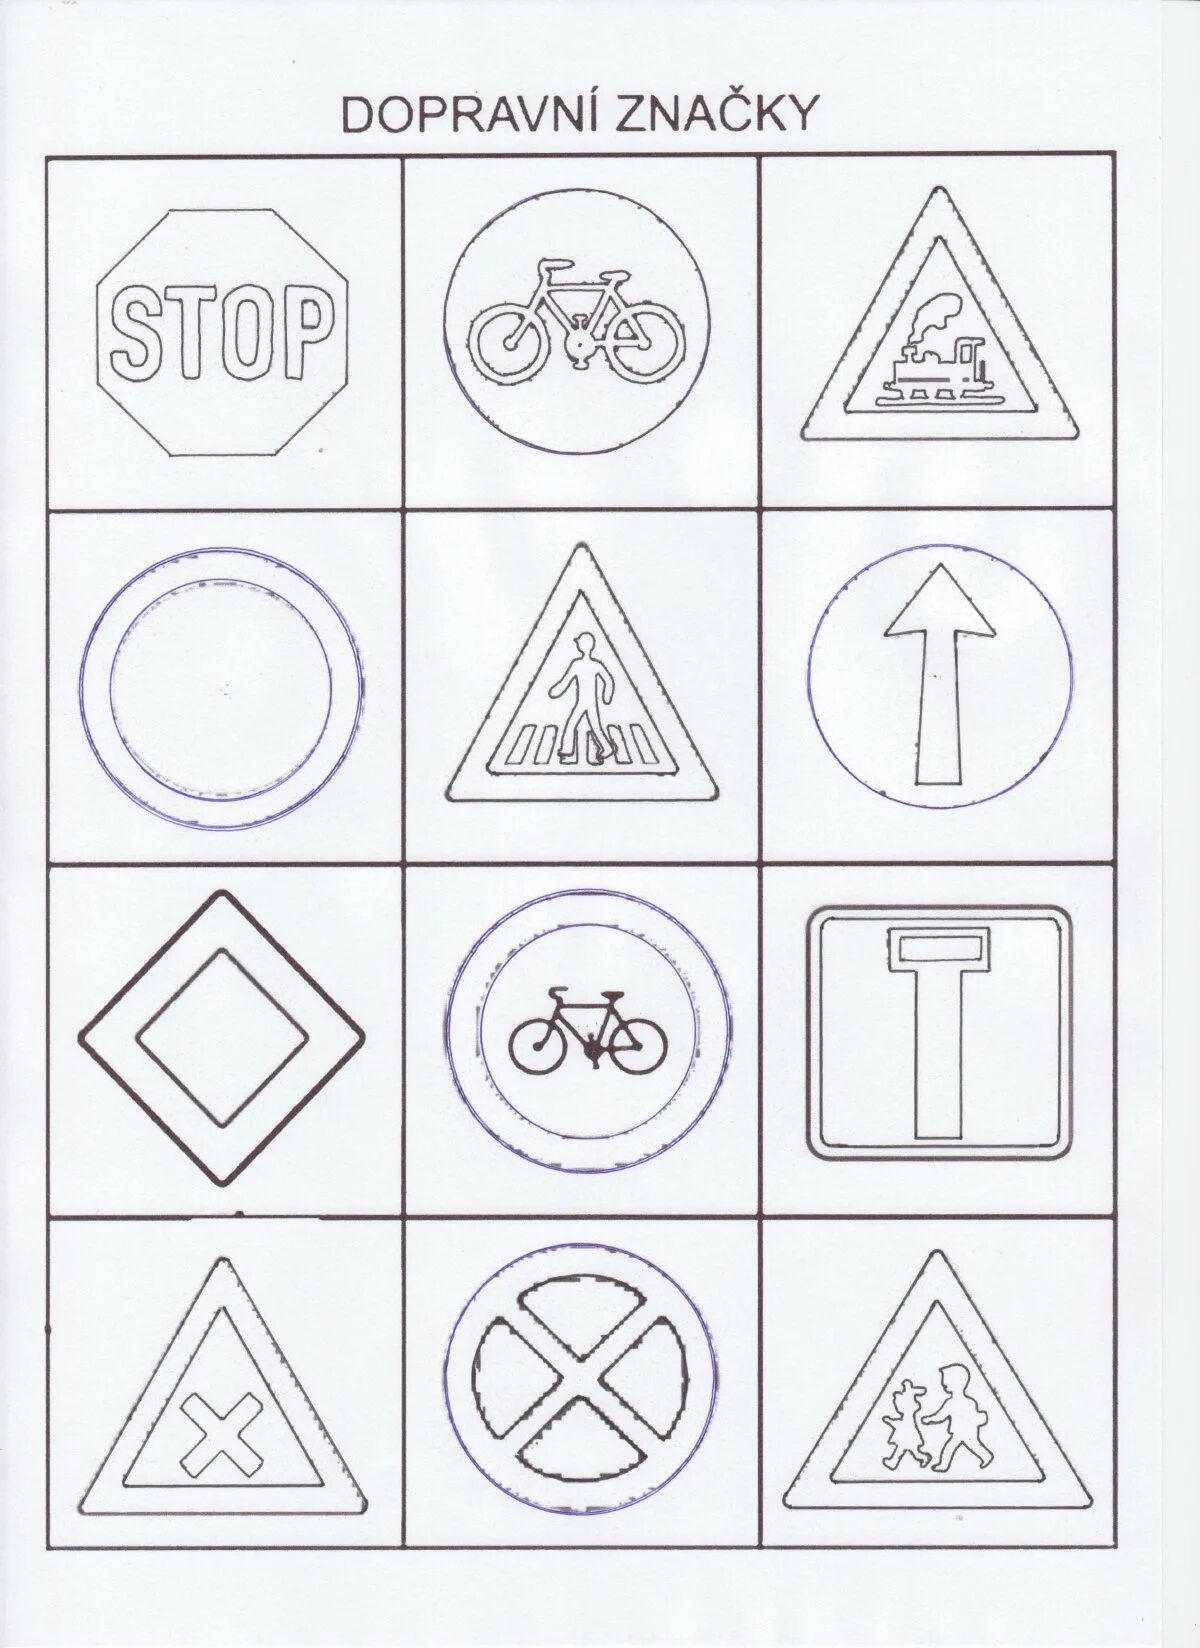 Traffic signs for preschool children according to traffic rules #16